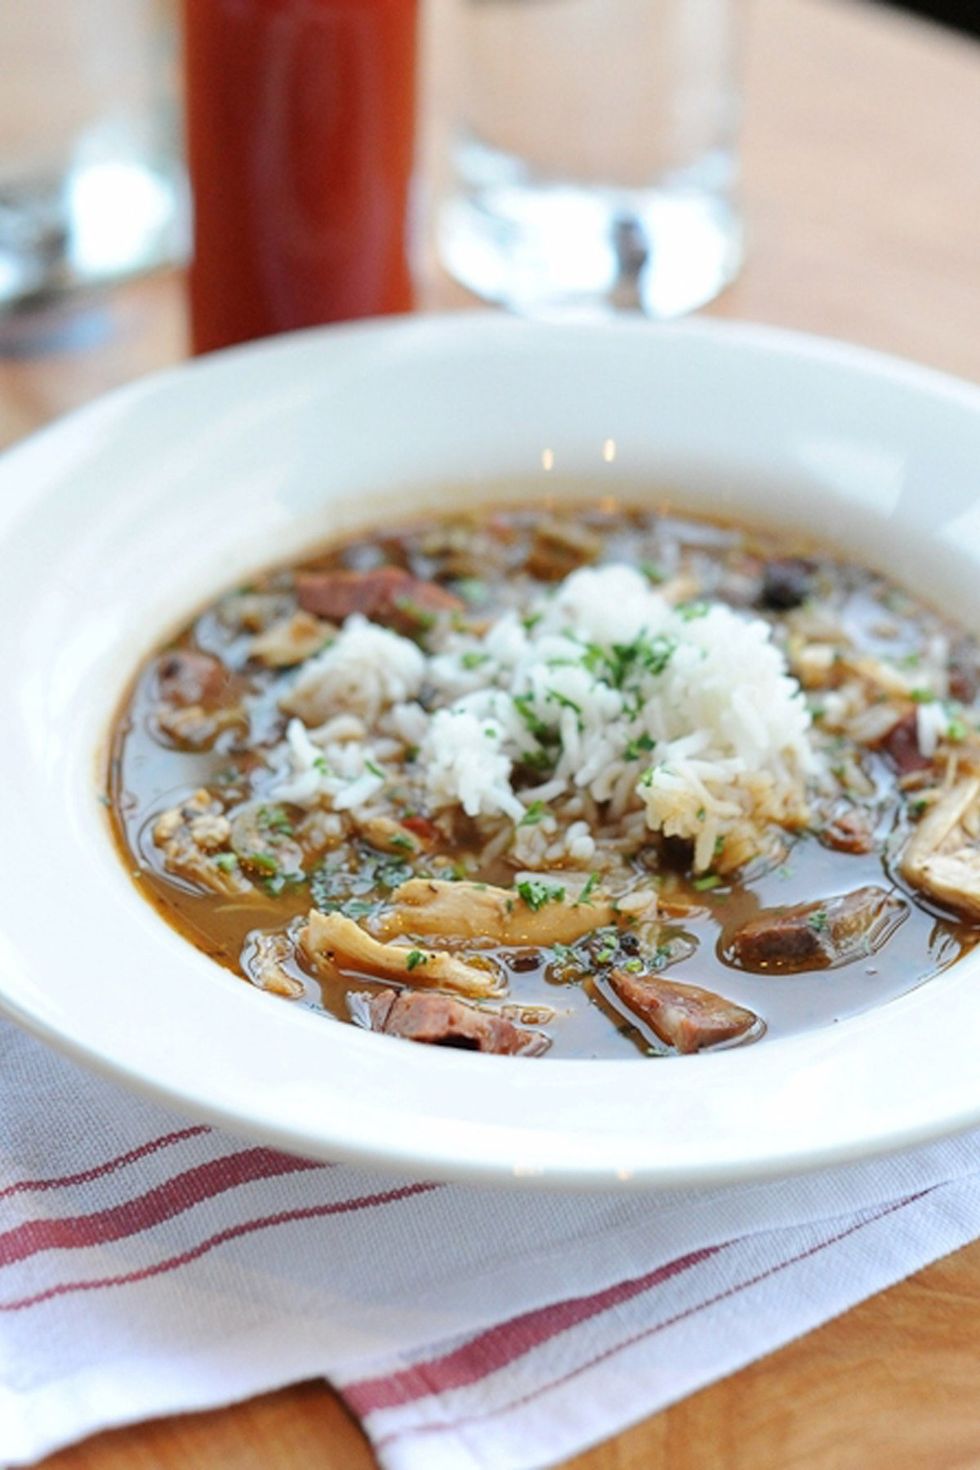 Secret Recipe: Boxing Room's Chicken and Sausage Gumbo